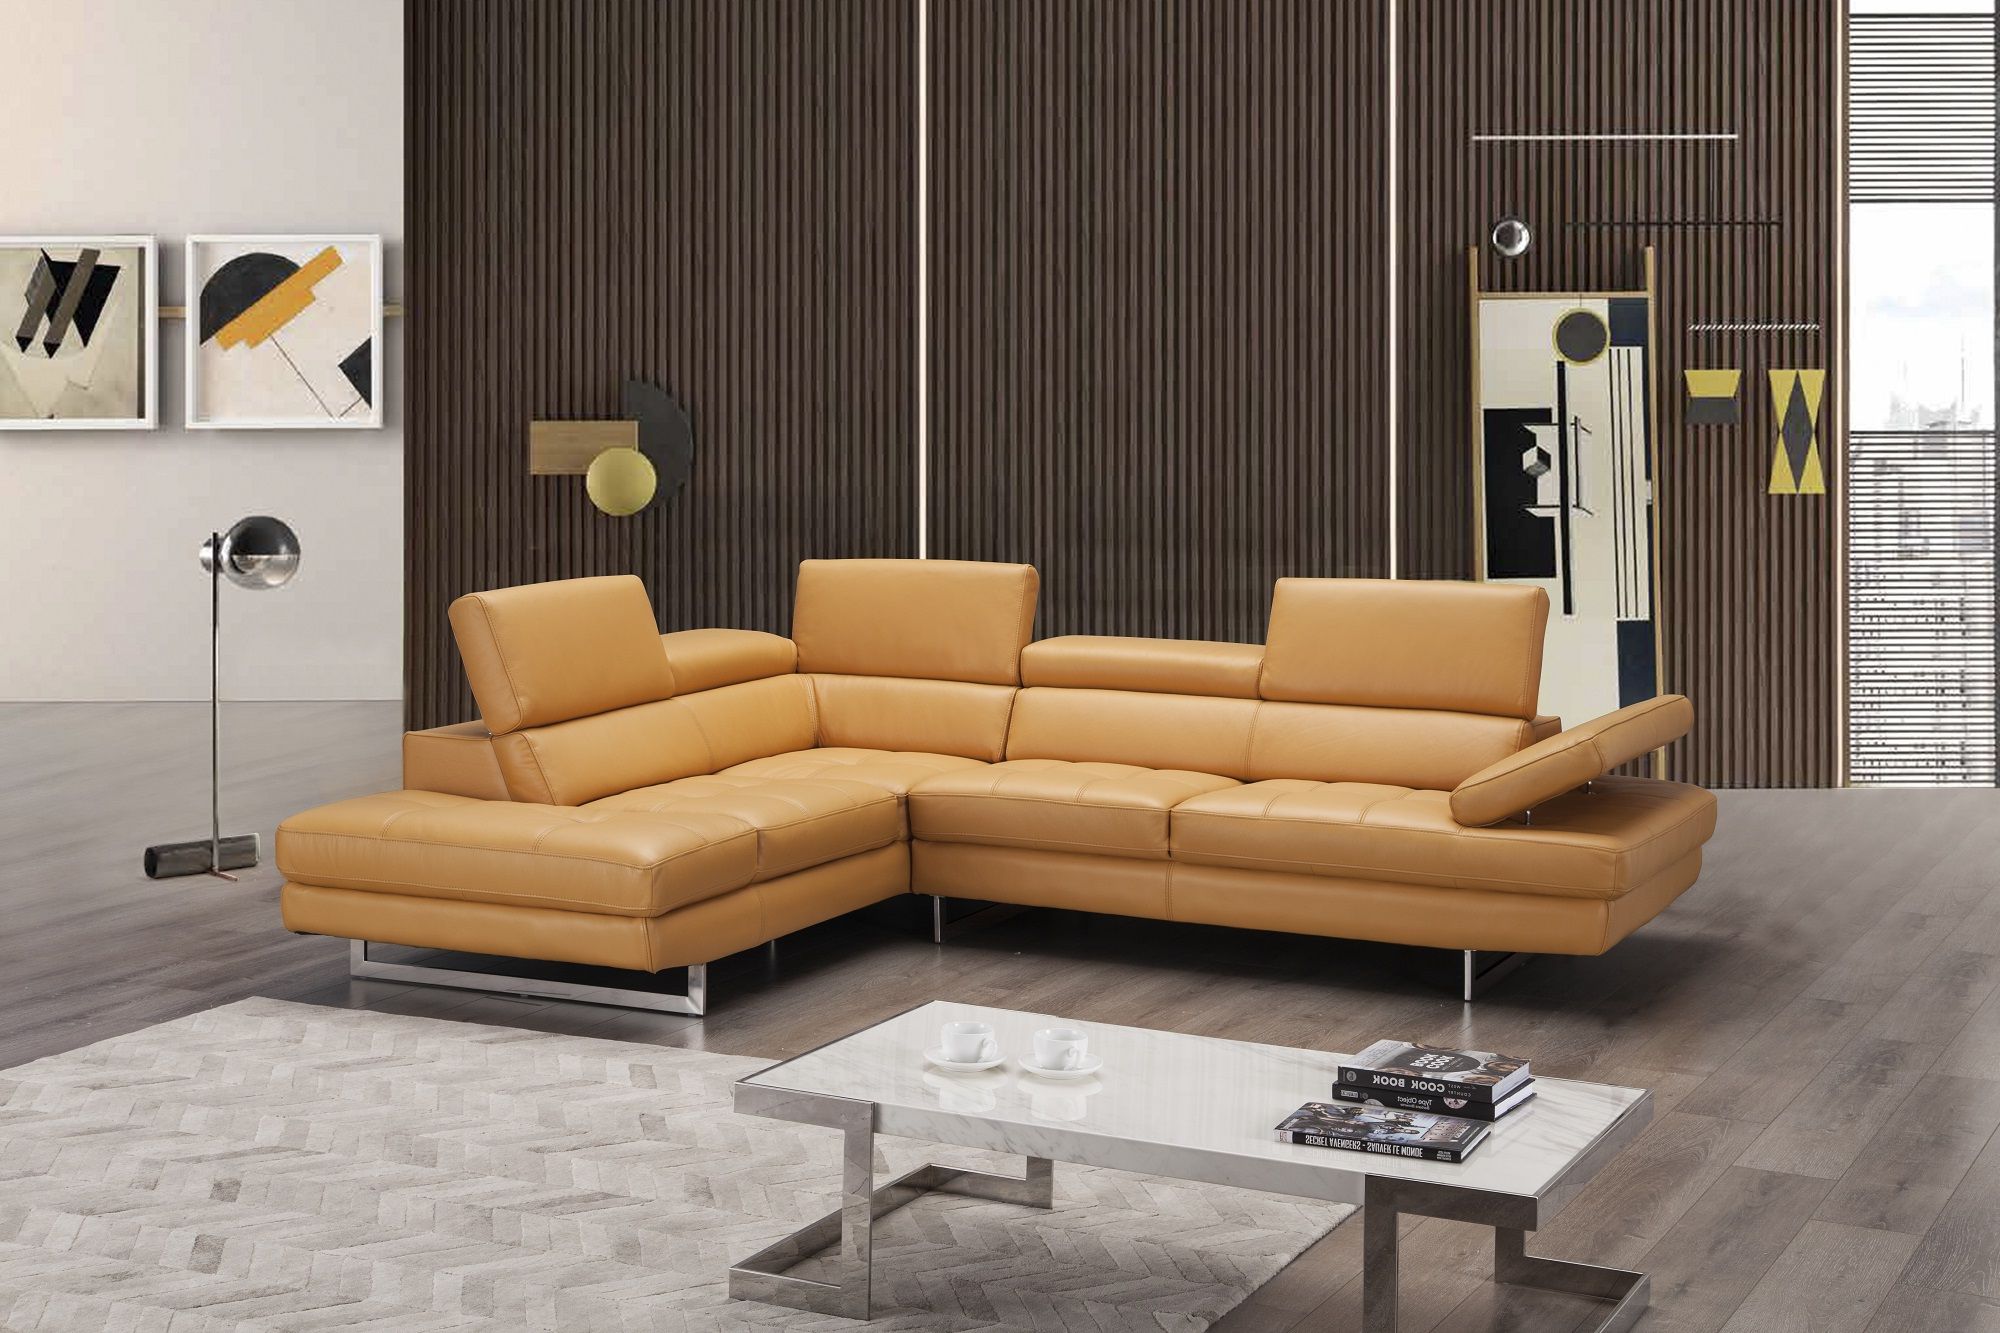 Elegant Modern Leather L Shape Sectional Washington Dc J&m Furniture Intended For Modern L Shaped Sofa Sectionals (View 5 of 20)